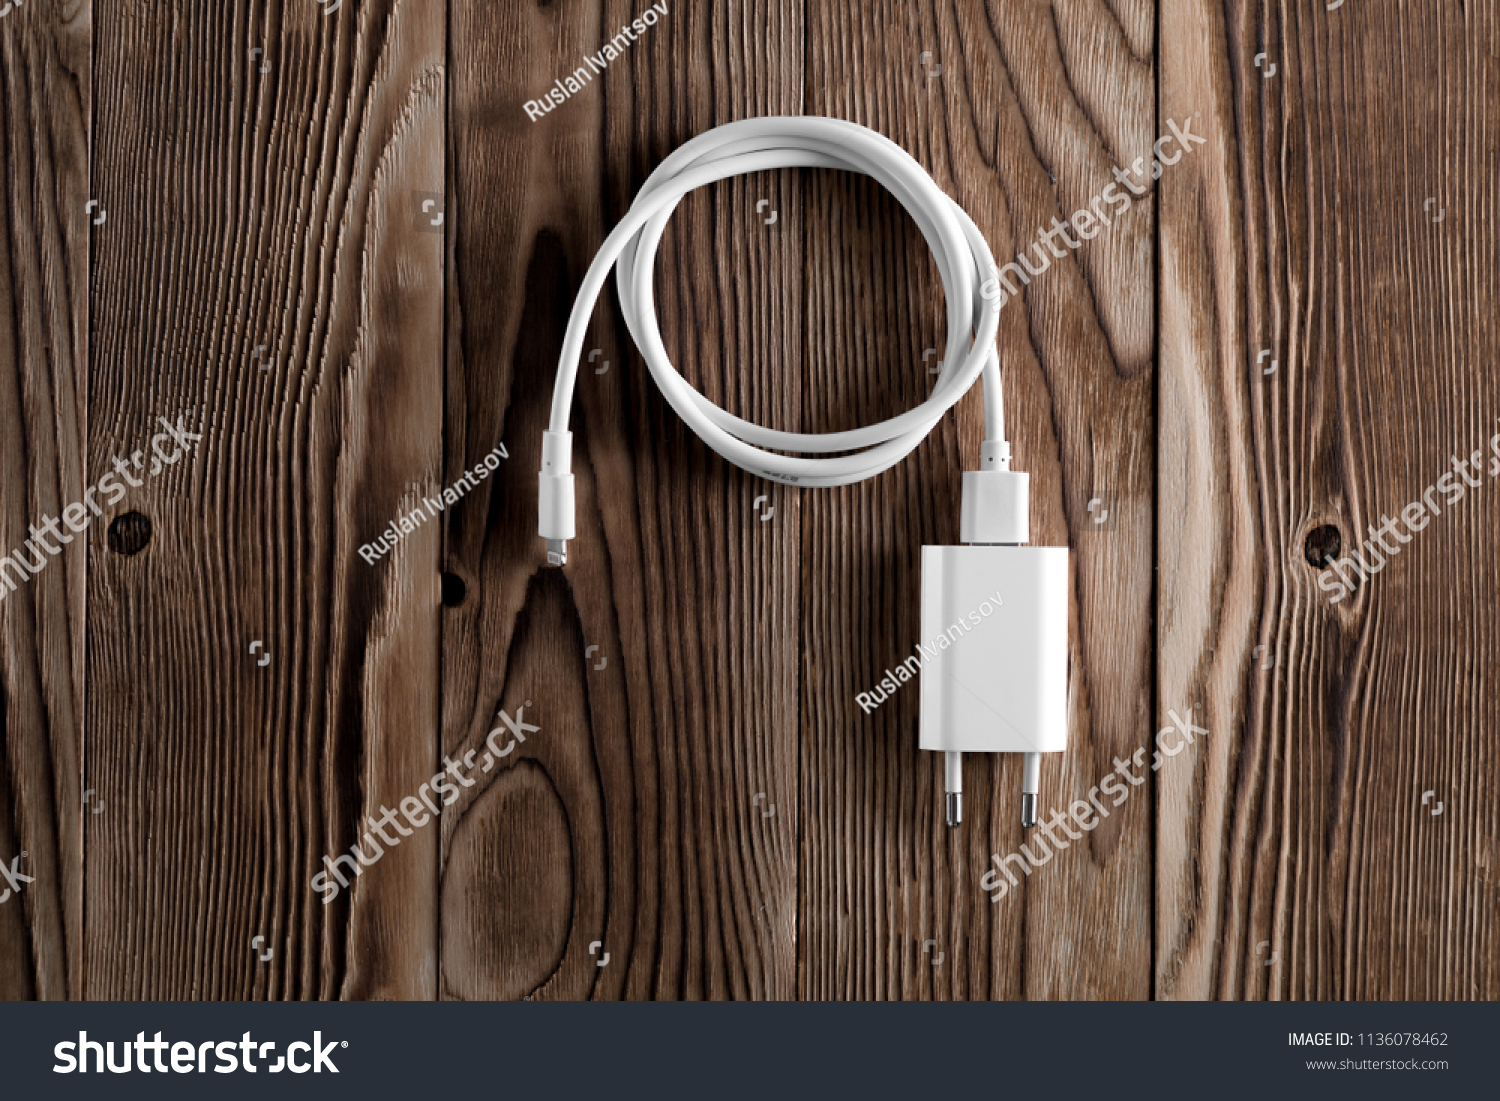 Cable phone chargers on wood background #1136078462